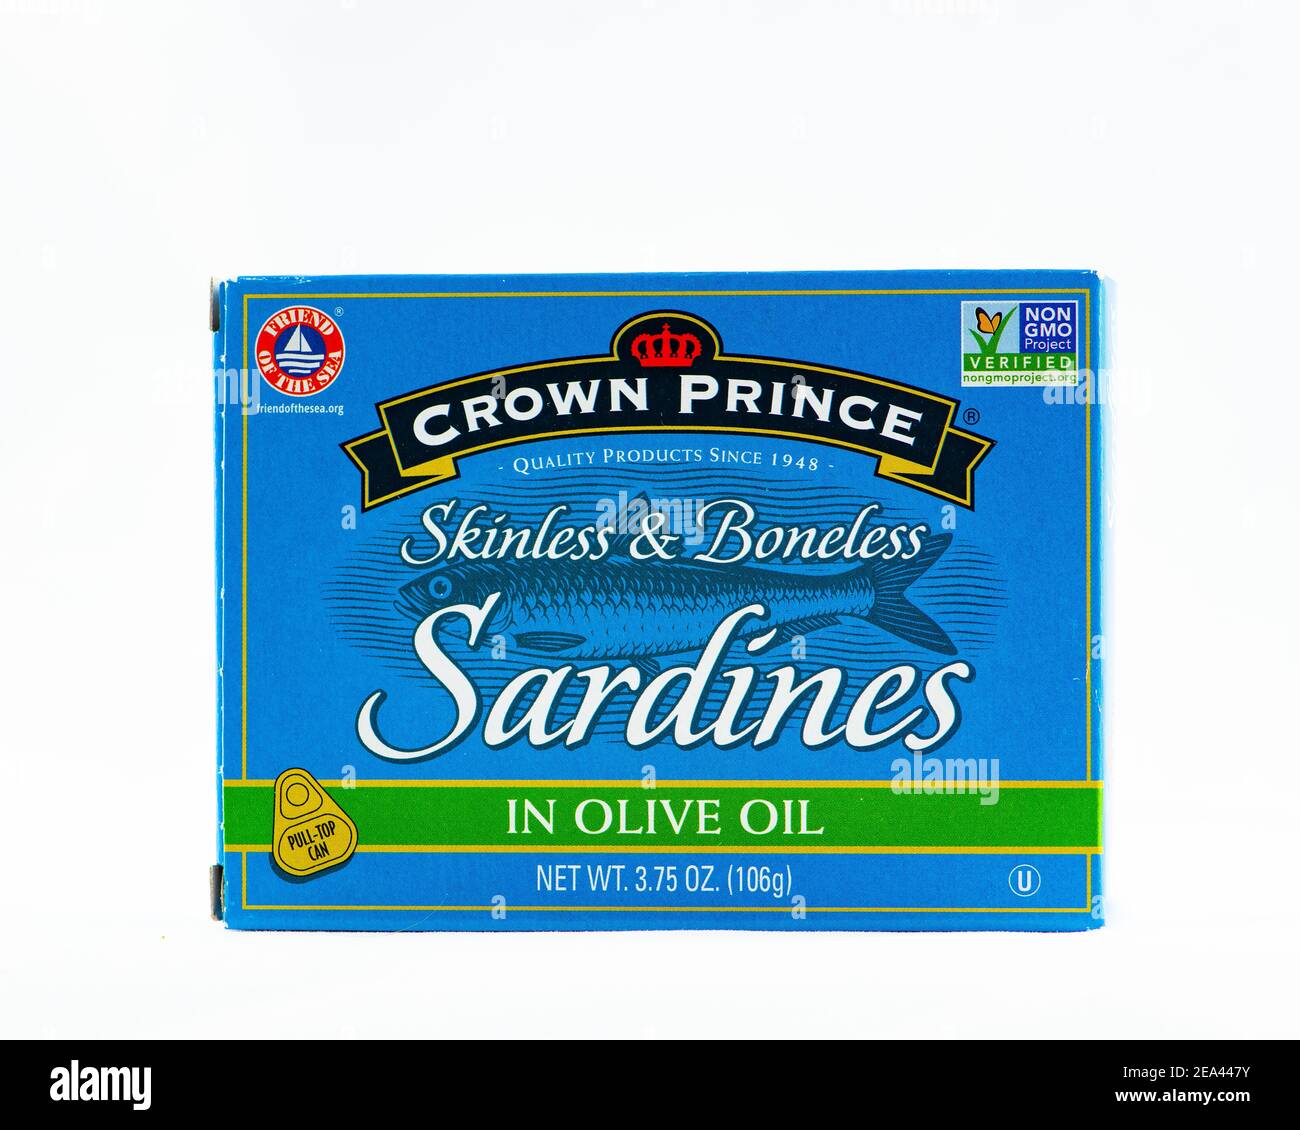 A can of Crown Prince Skinless & Boneless Sardines packed in olive oil, packaged in a blue box. Stock Photo